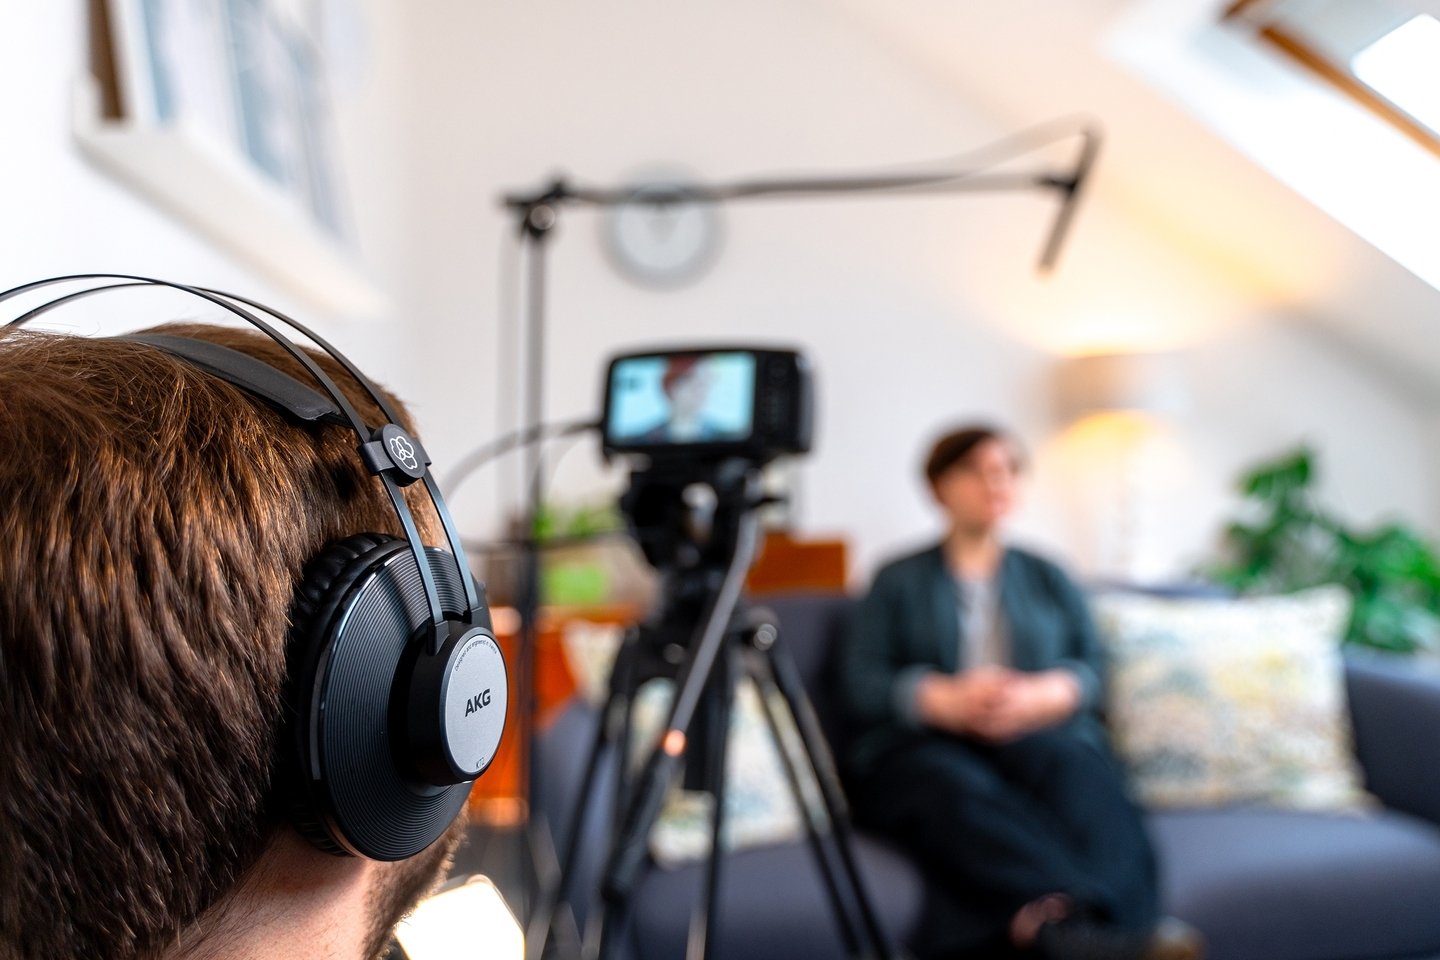 Talking to a camera can be scary 🫣 We get it, why do you think we're behind the camera?! Here are a few tips:

🎤 Have someone interview you. This might seem obvious, but talking to a human is much easier than a metal box. They can give you live fee